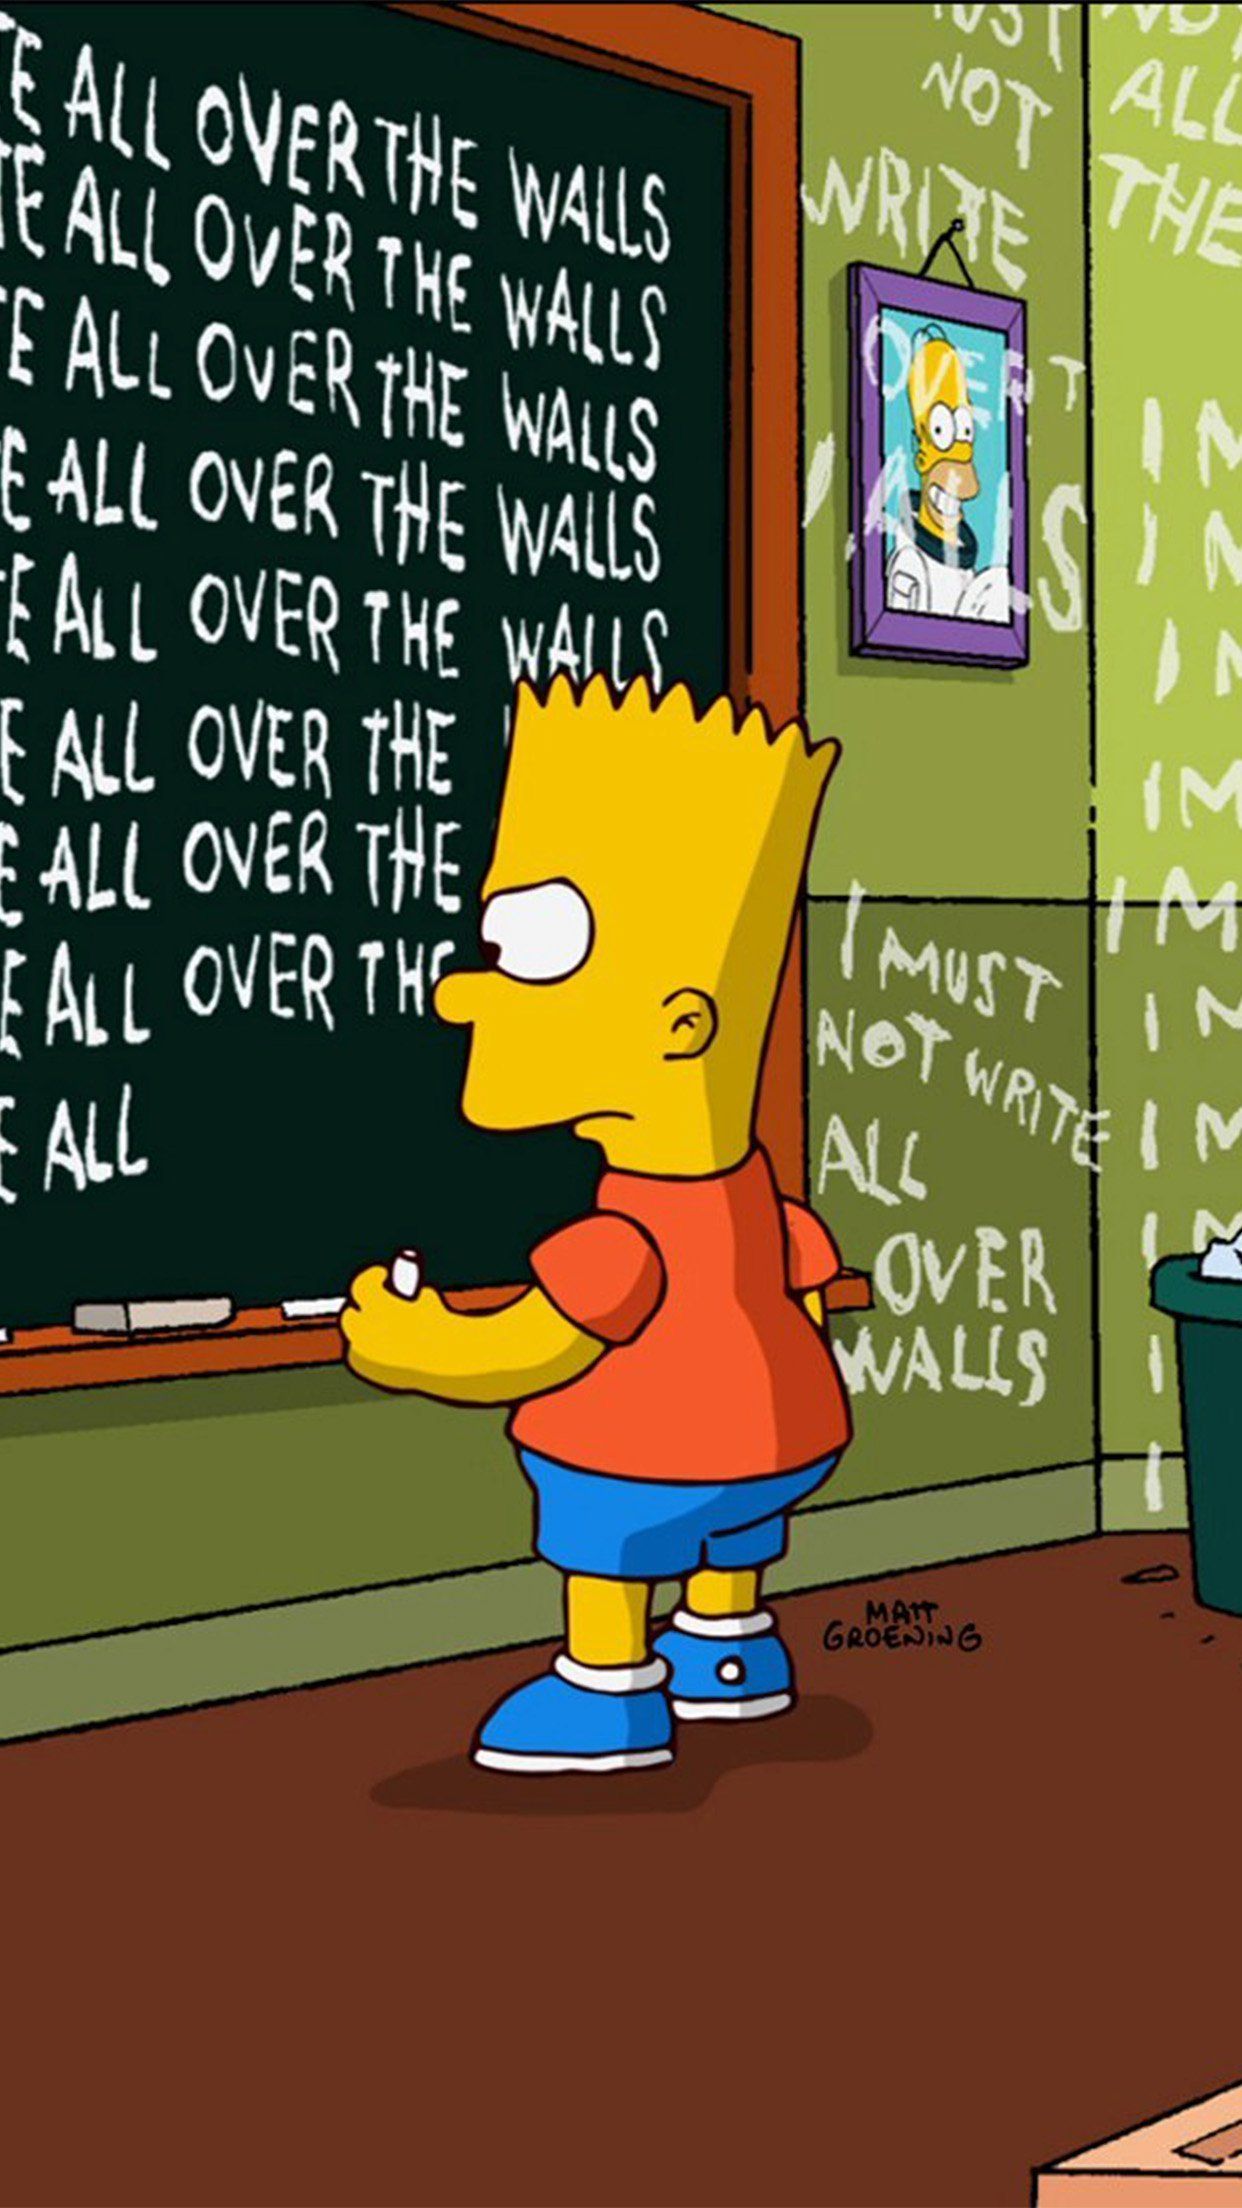 Bart Simpson writing on a chalkboard in a classroom. - The Simpsons, Bart Simpson